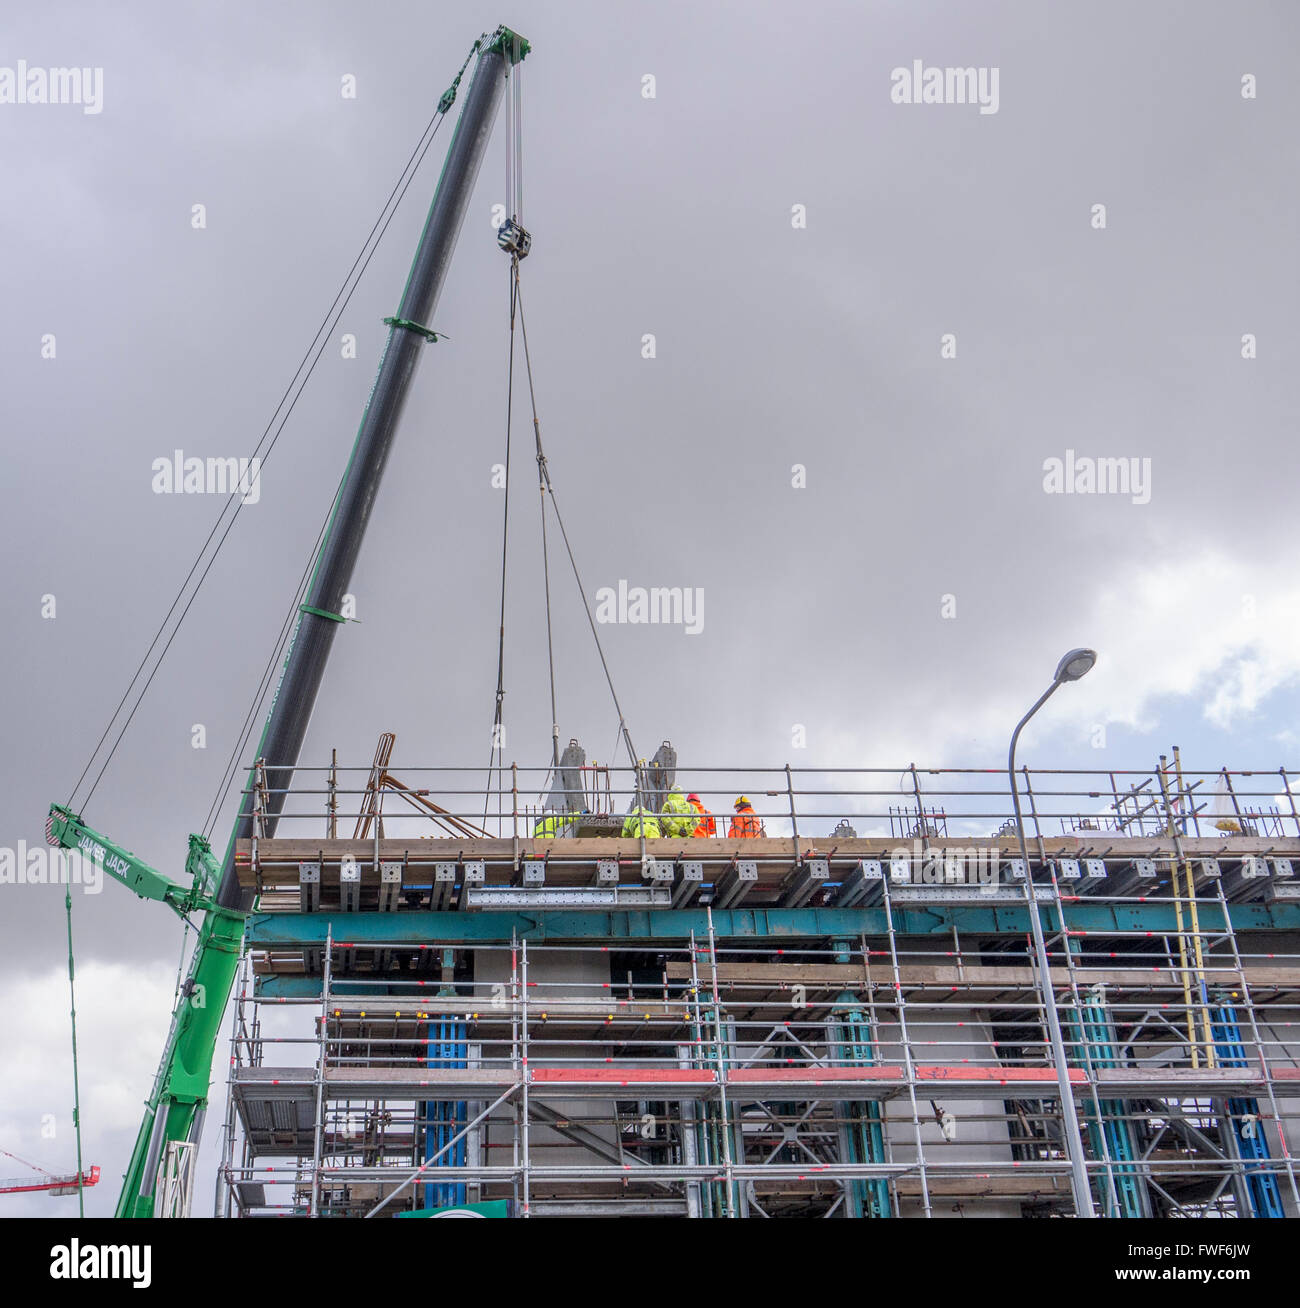 Construction workers fitting concrete pillars using a large crane Stock Photo